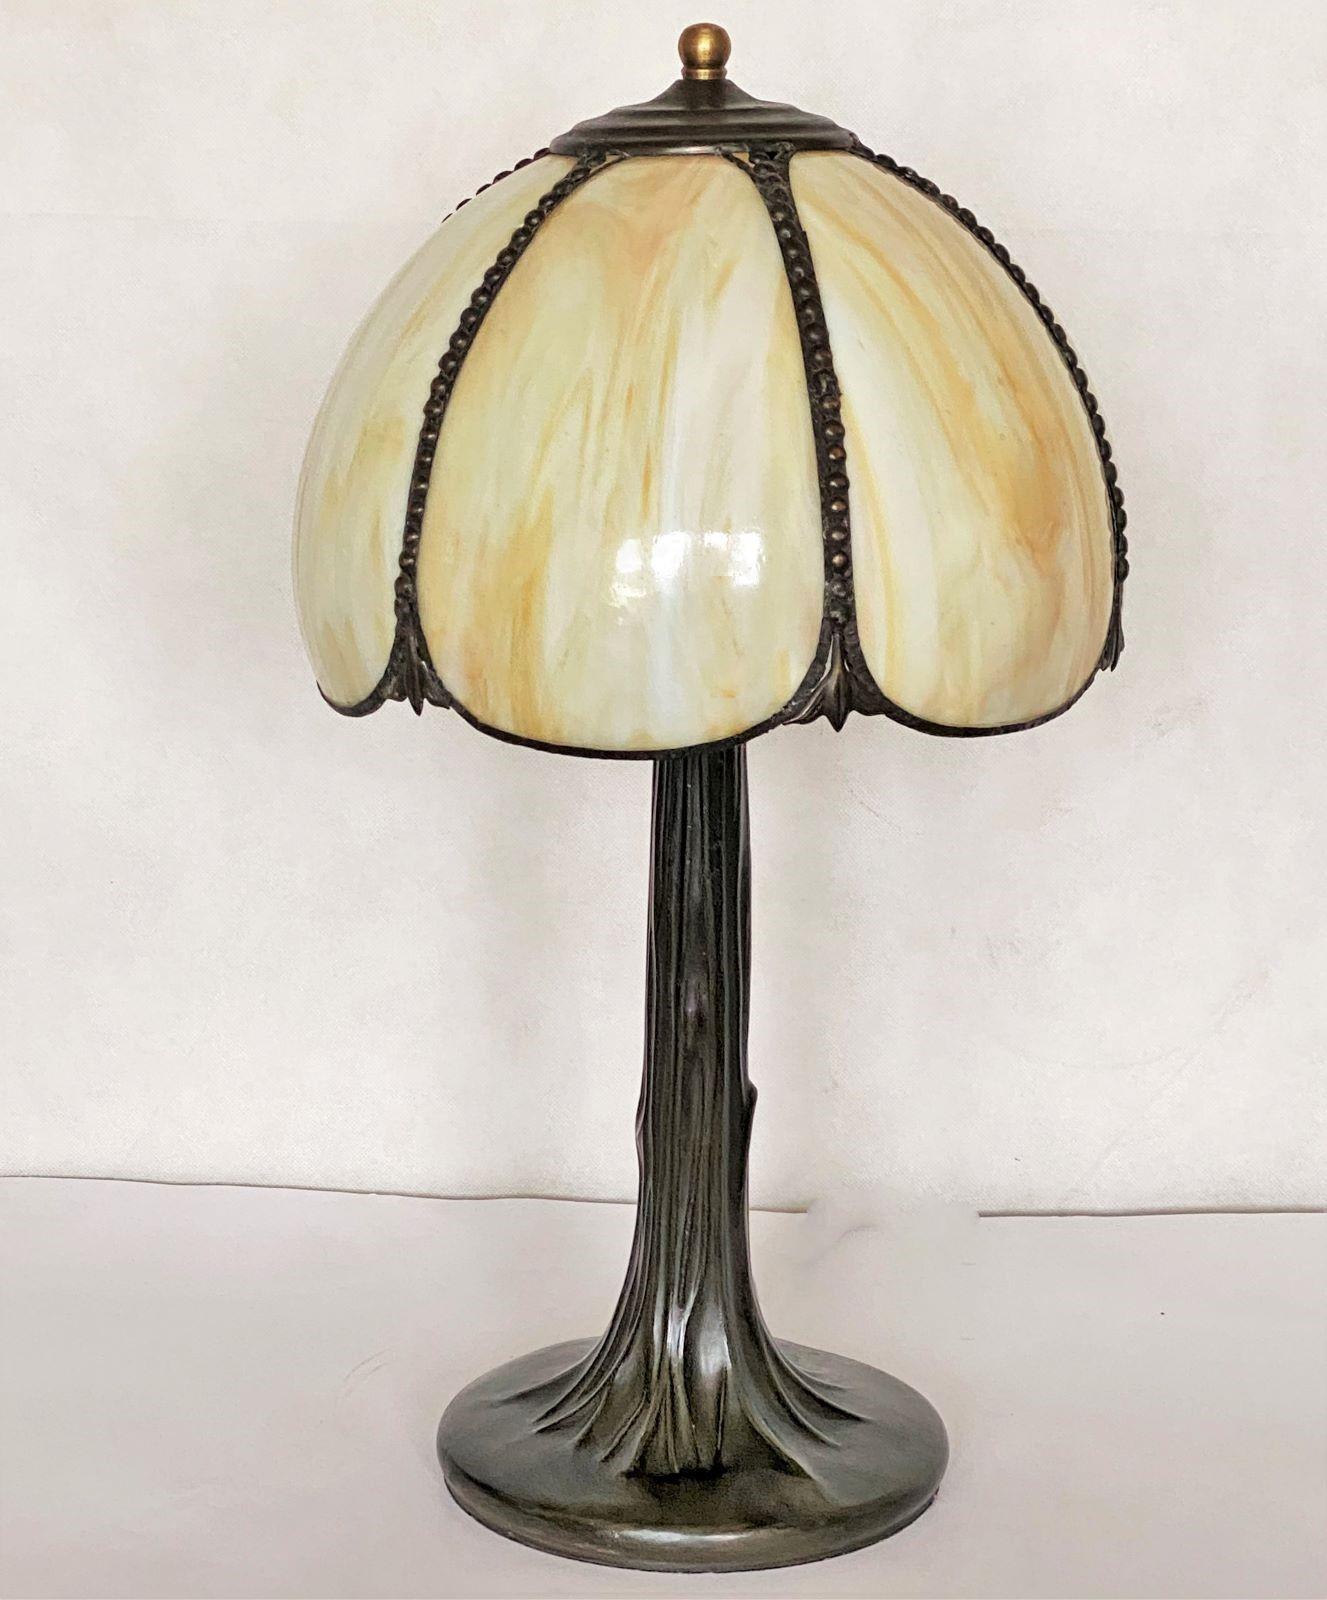 A French Art Deco table lamp from 1930-1939. Dome form shade with six bent slag glass panels beautifuly connected with brass on a patinated brass tree trunk shaped base. The table lamp is in very good condition and has been recently rewired. It